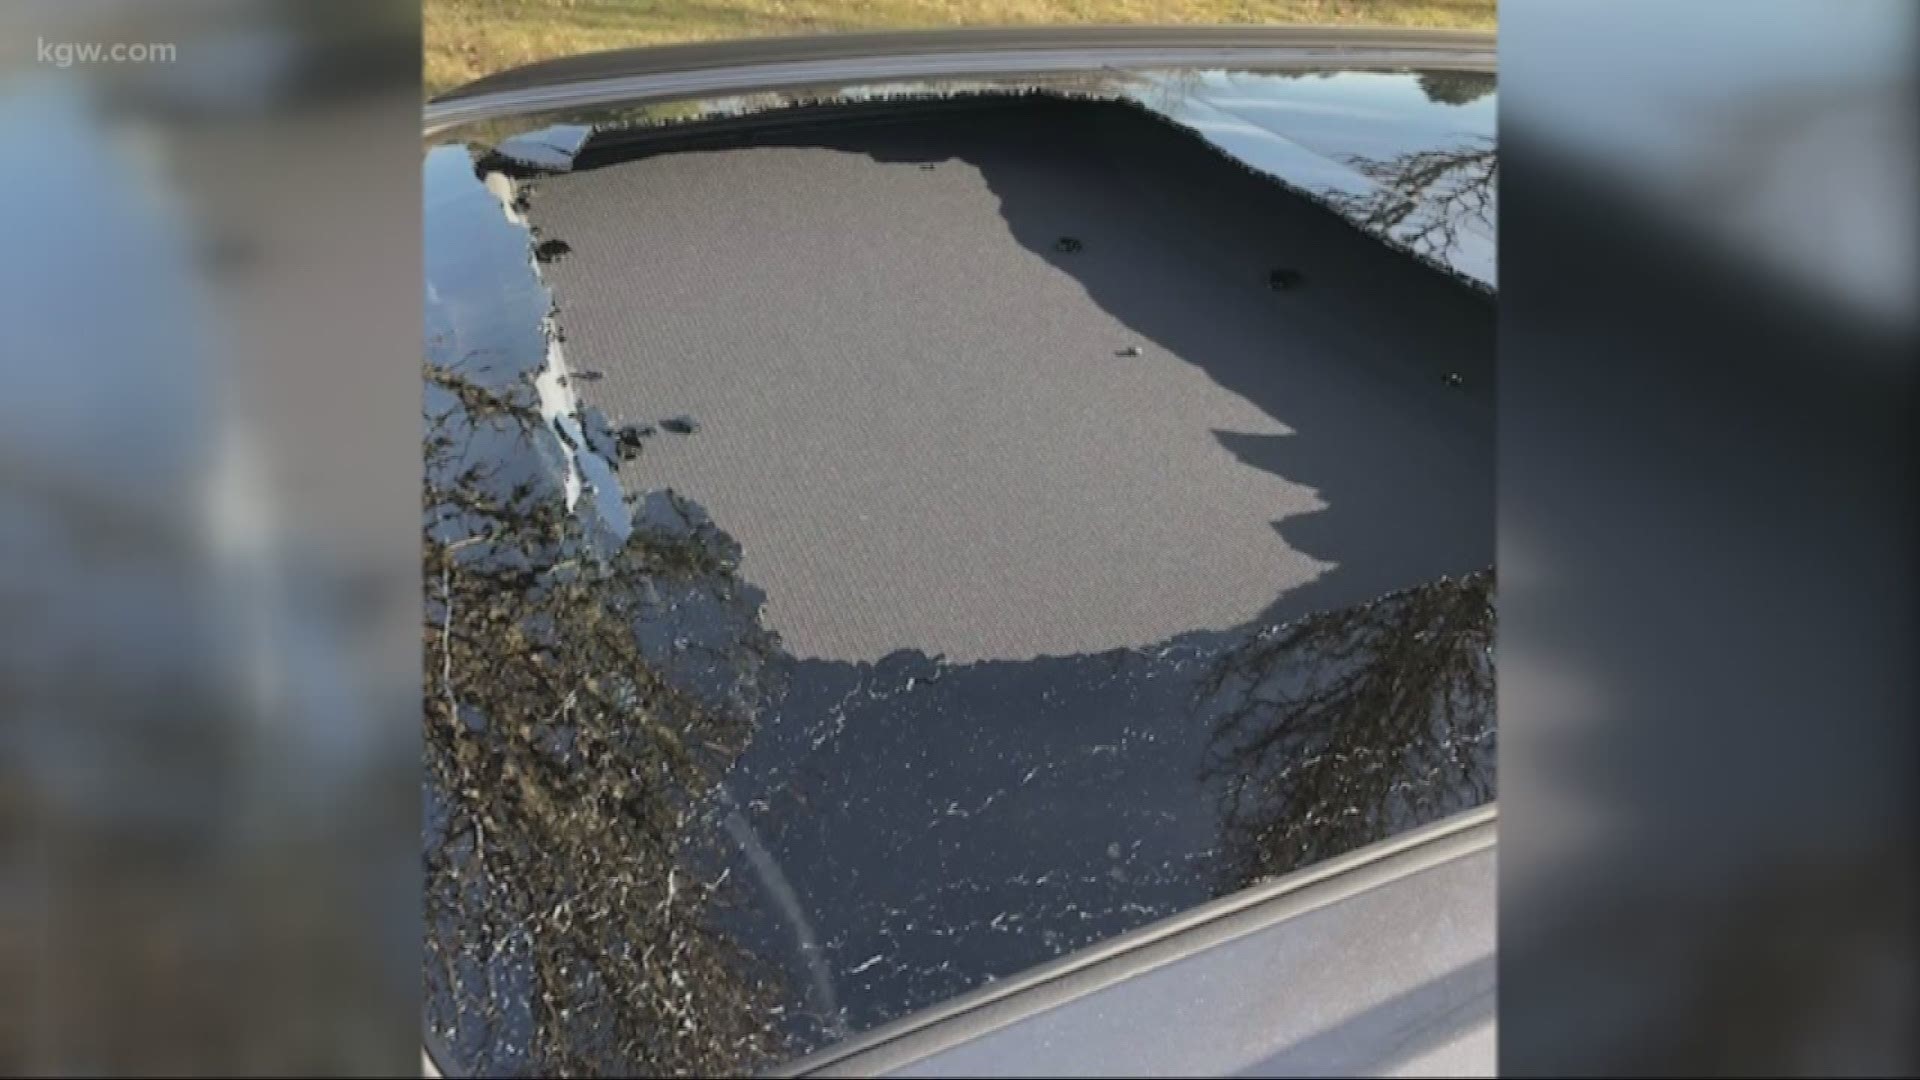 The government is investigating exploding sunroofs, which are more common than you might think.